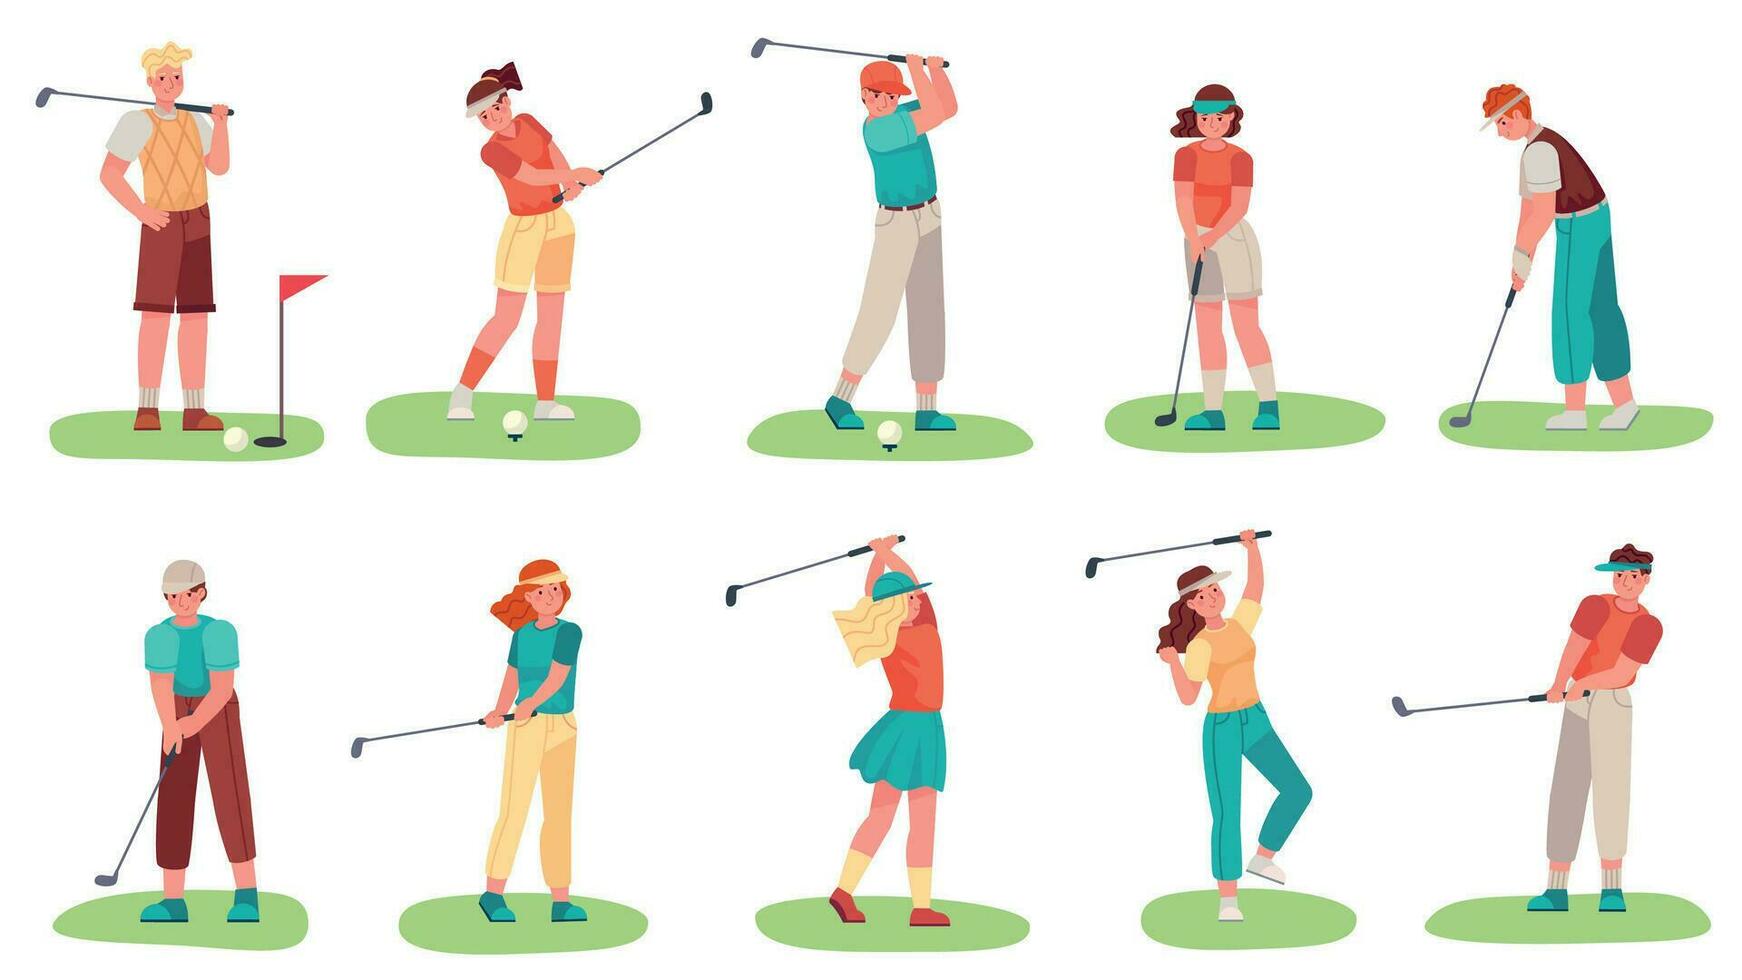 Golf playing. Men and women training with golf clubs on green grass, sport hobby players golfer in uniform, cartoon set vector illustration